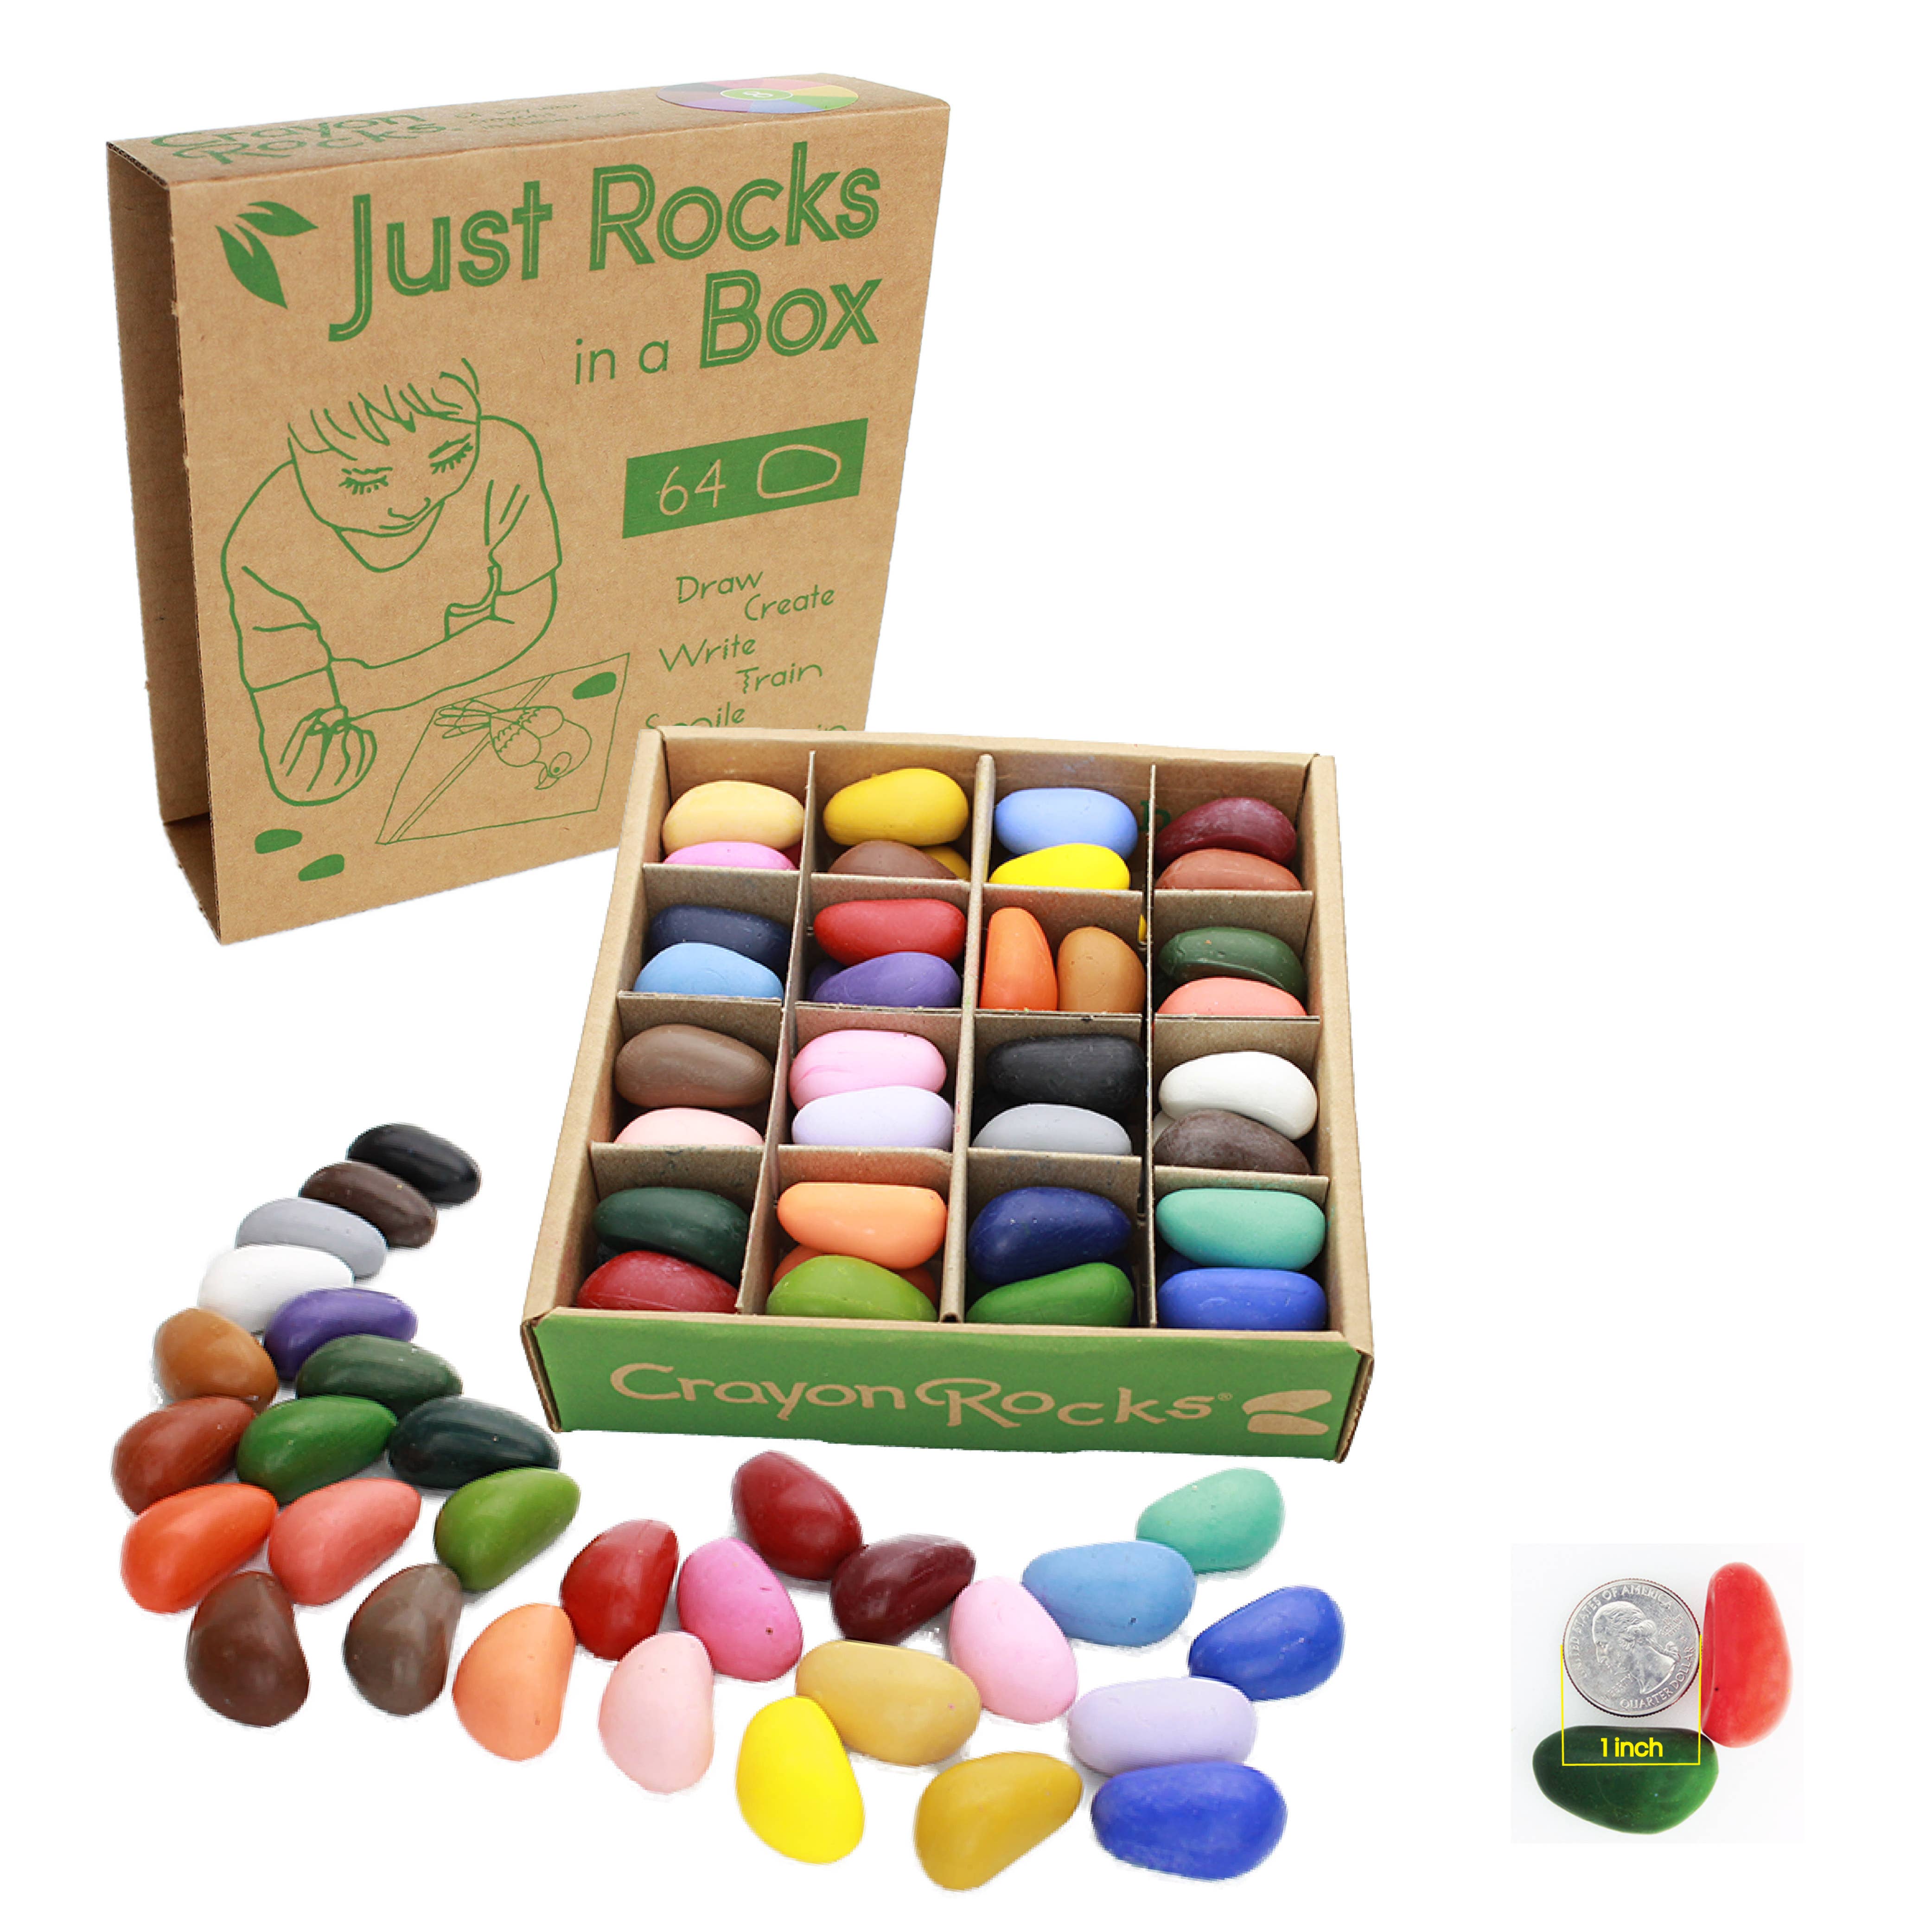 Just Rocks in a Box - 32 Colors 64 Crayons (2 of each color